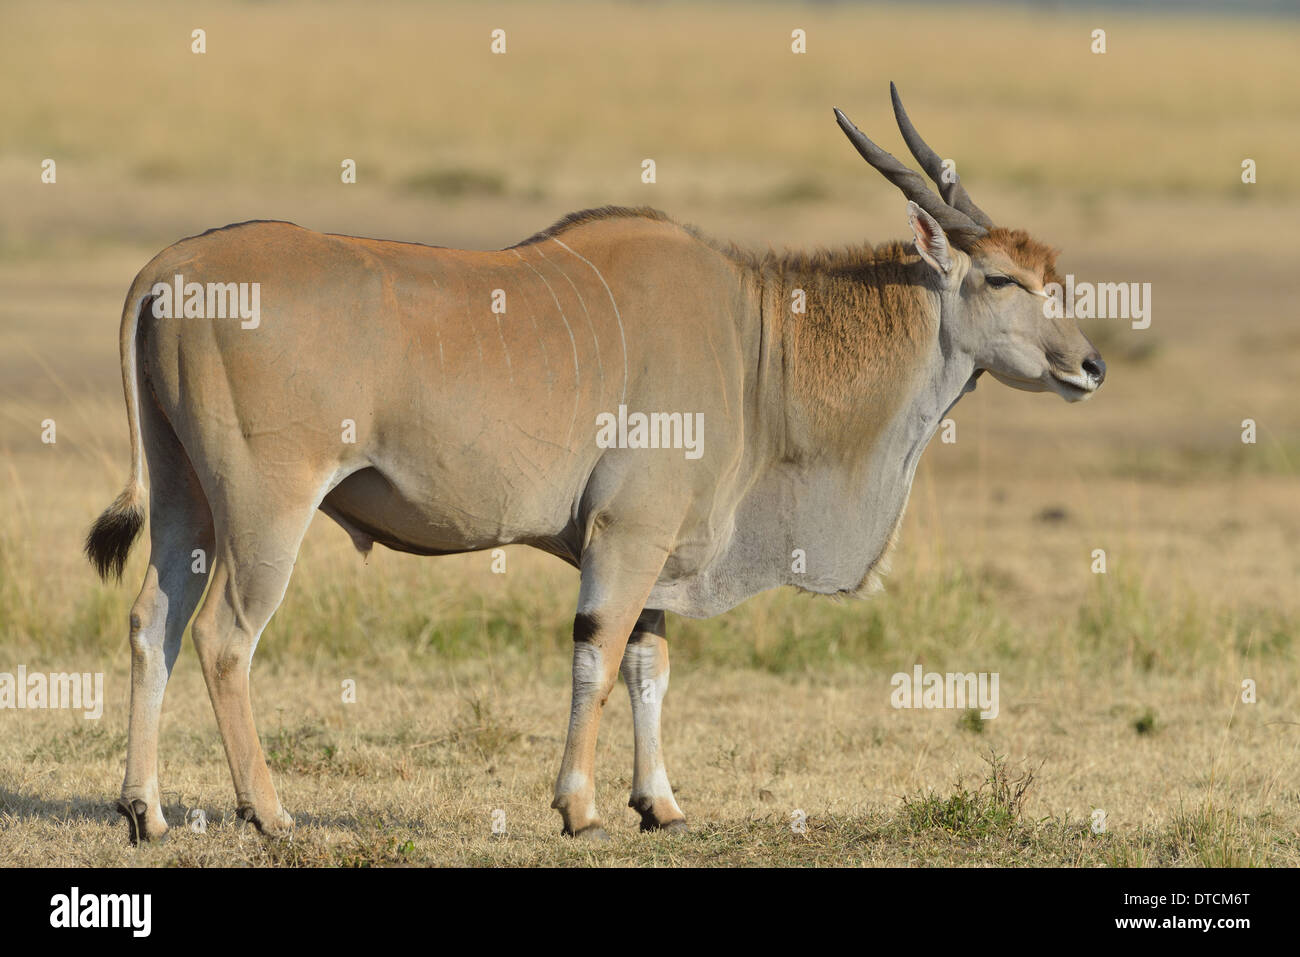 Common Eland - Southern Eland - Eland Antelope (Taurotragus oryx) the largest species of antelope standing in the savanna Stock Photo